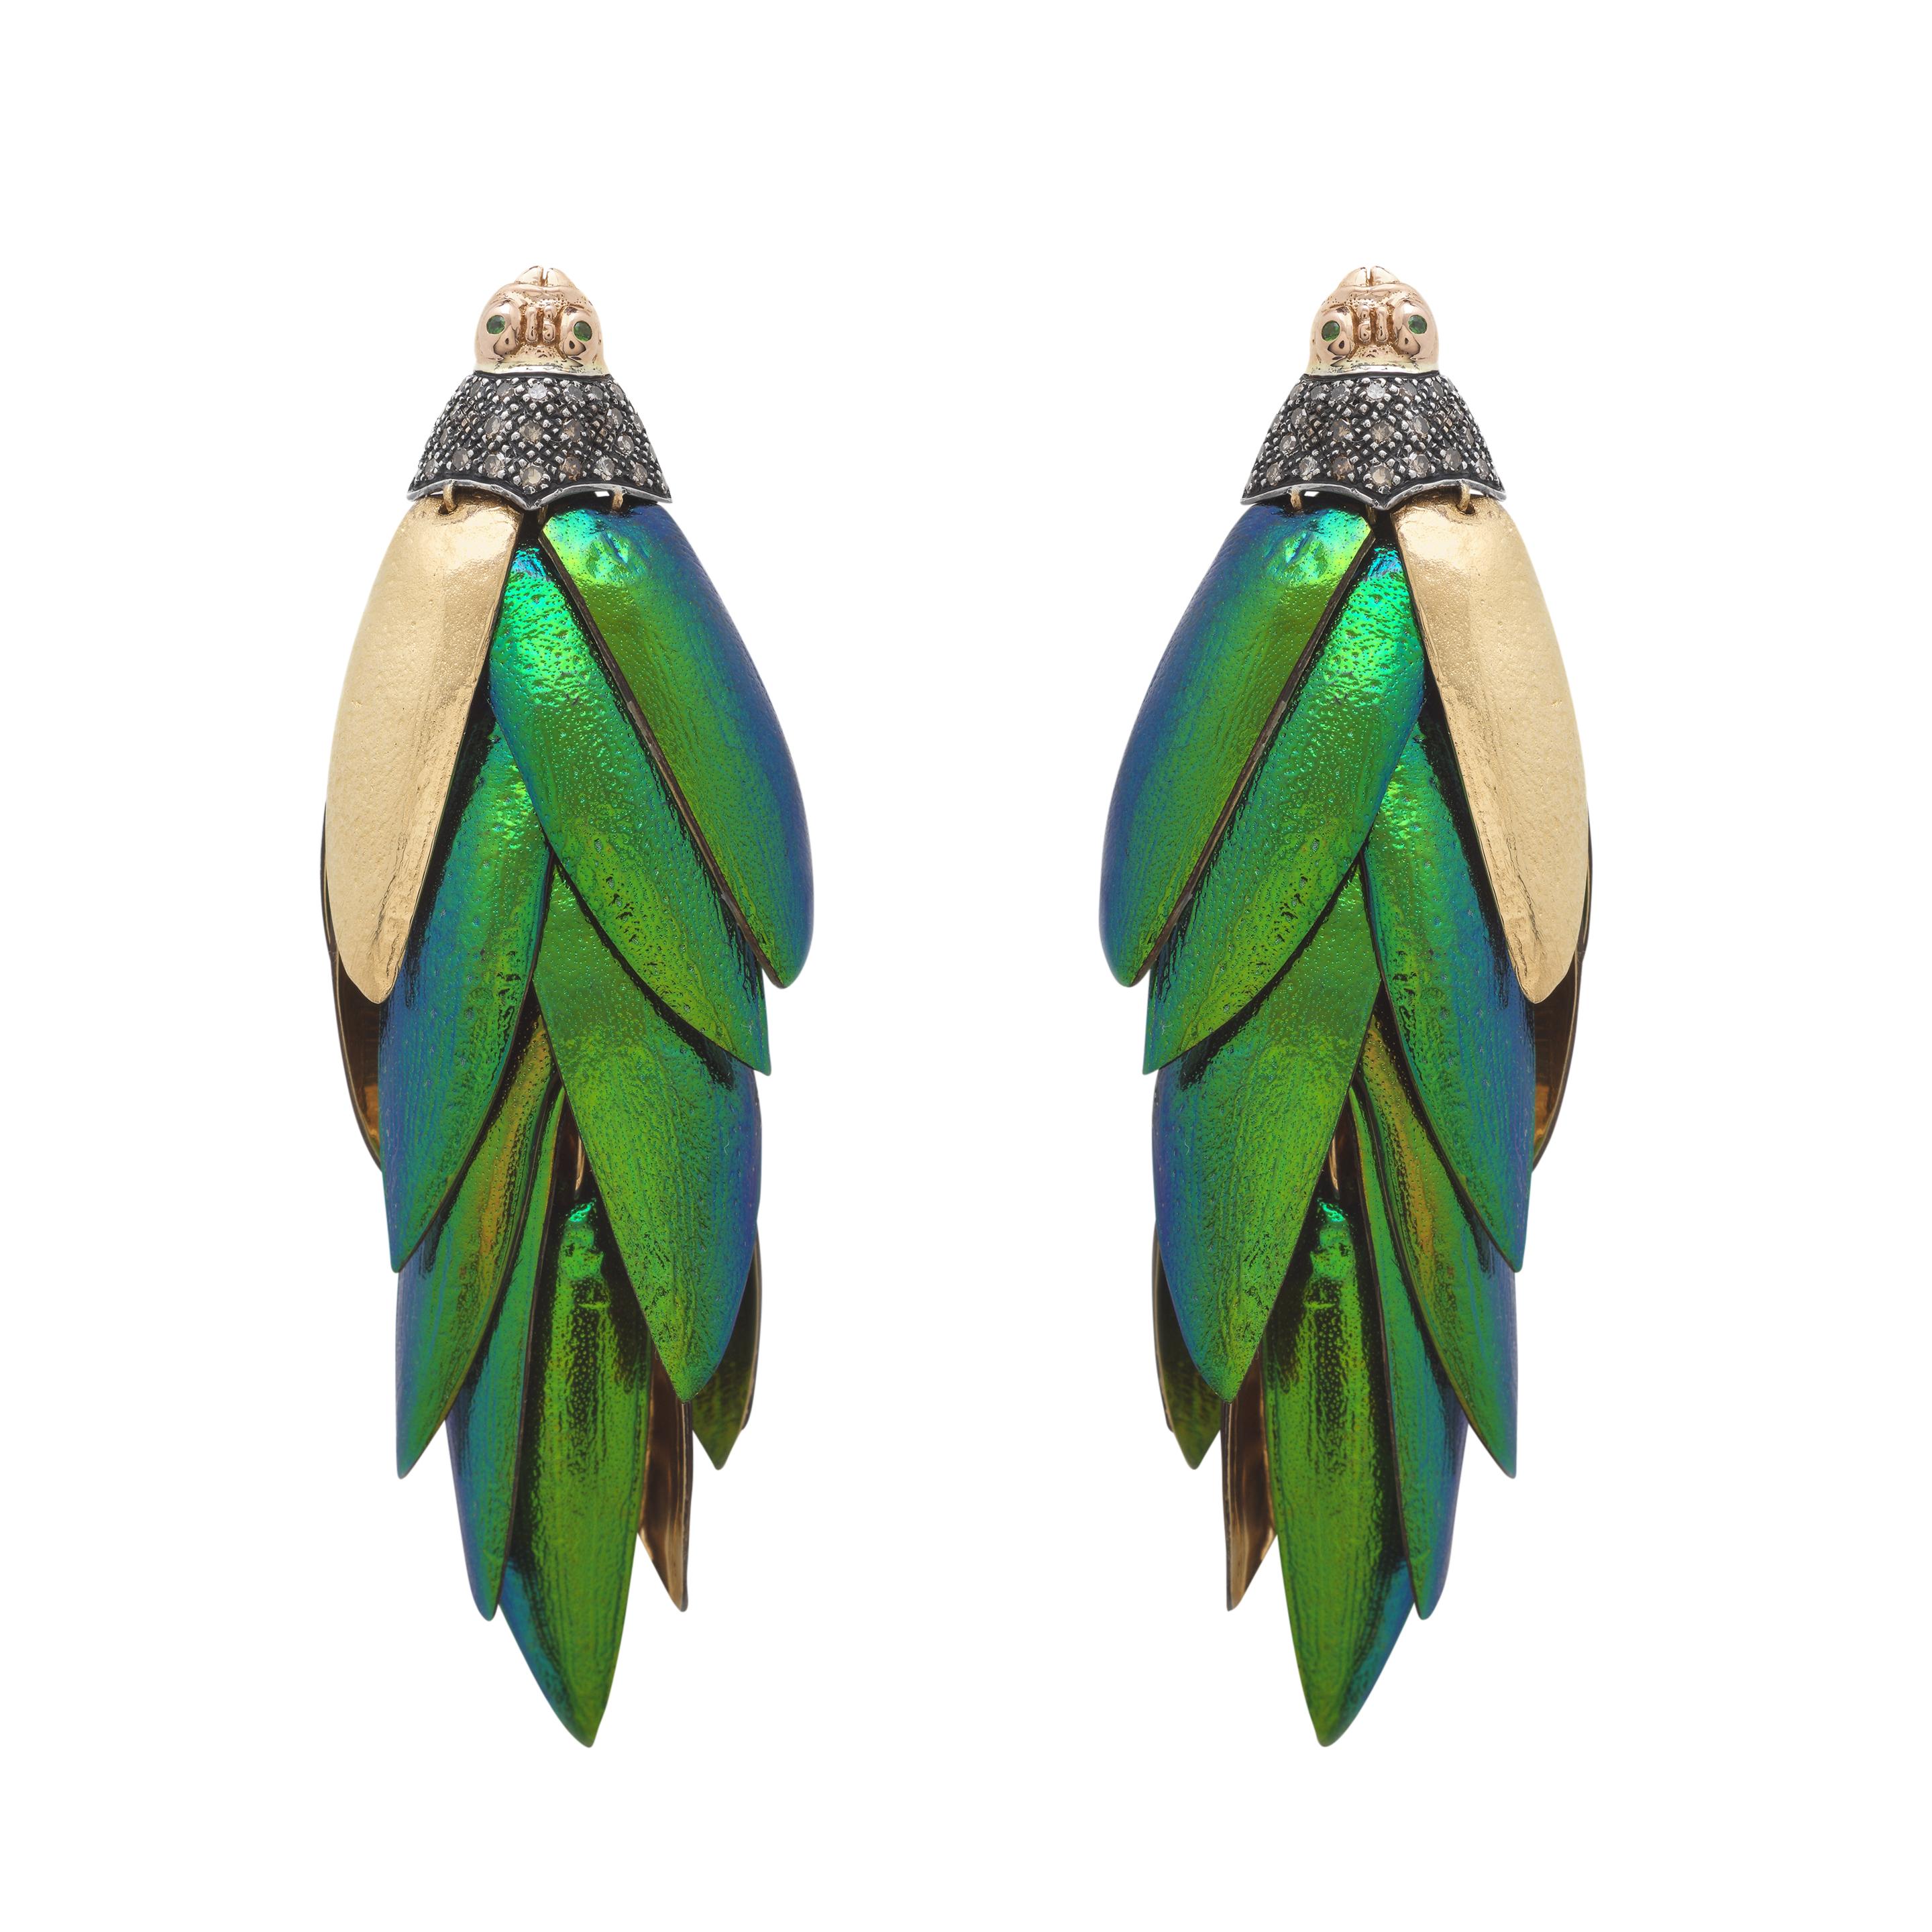 The shimmering iridescence of real scarab wings complements the luminosity of 18k recycled yellow and rose gold in these Scarab Bunch Earrings. Fashioned from over 40 real scarab wings, the gold wings contrast with the beetles’ wings’ appealing,